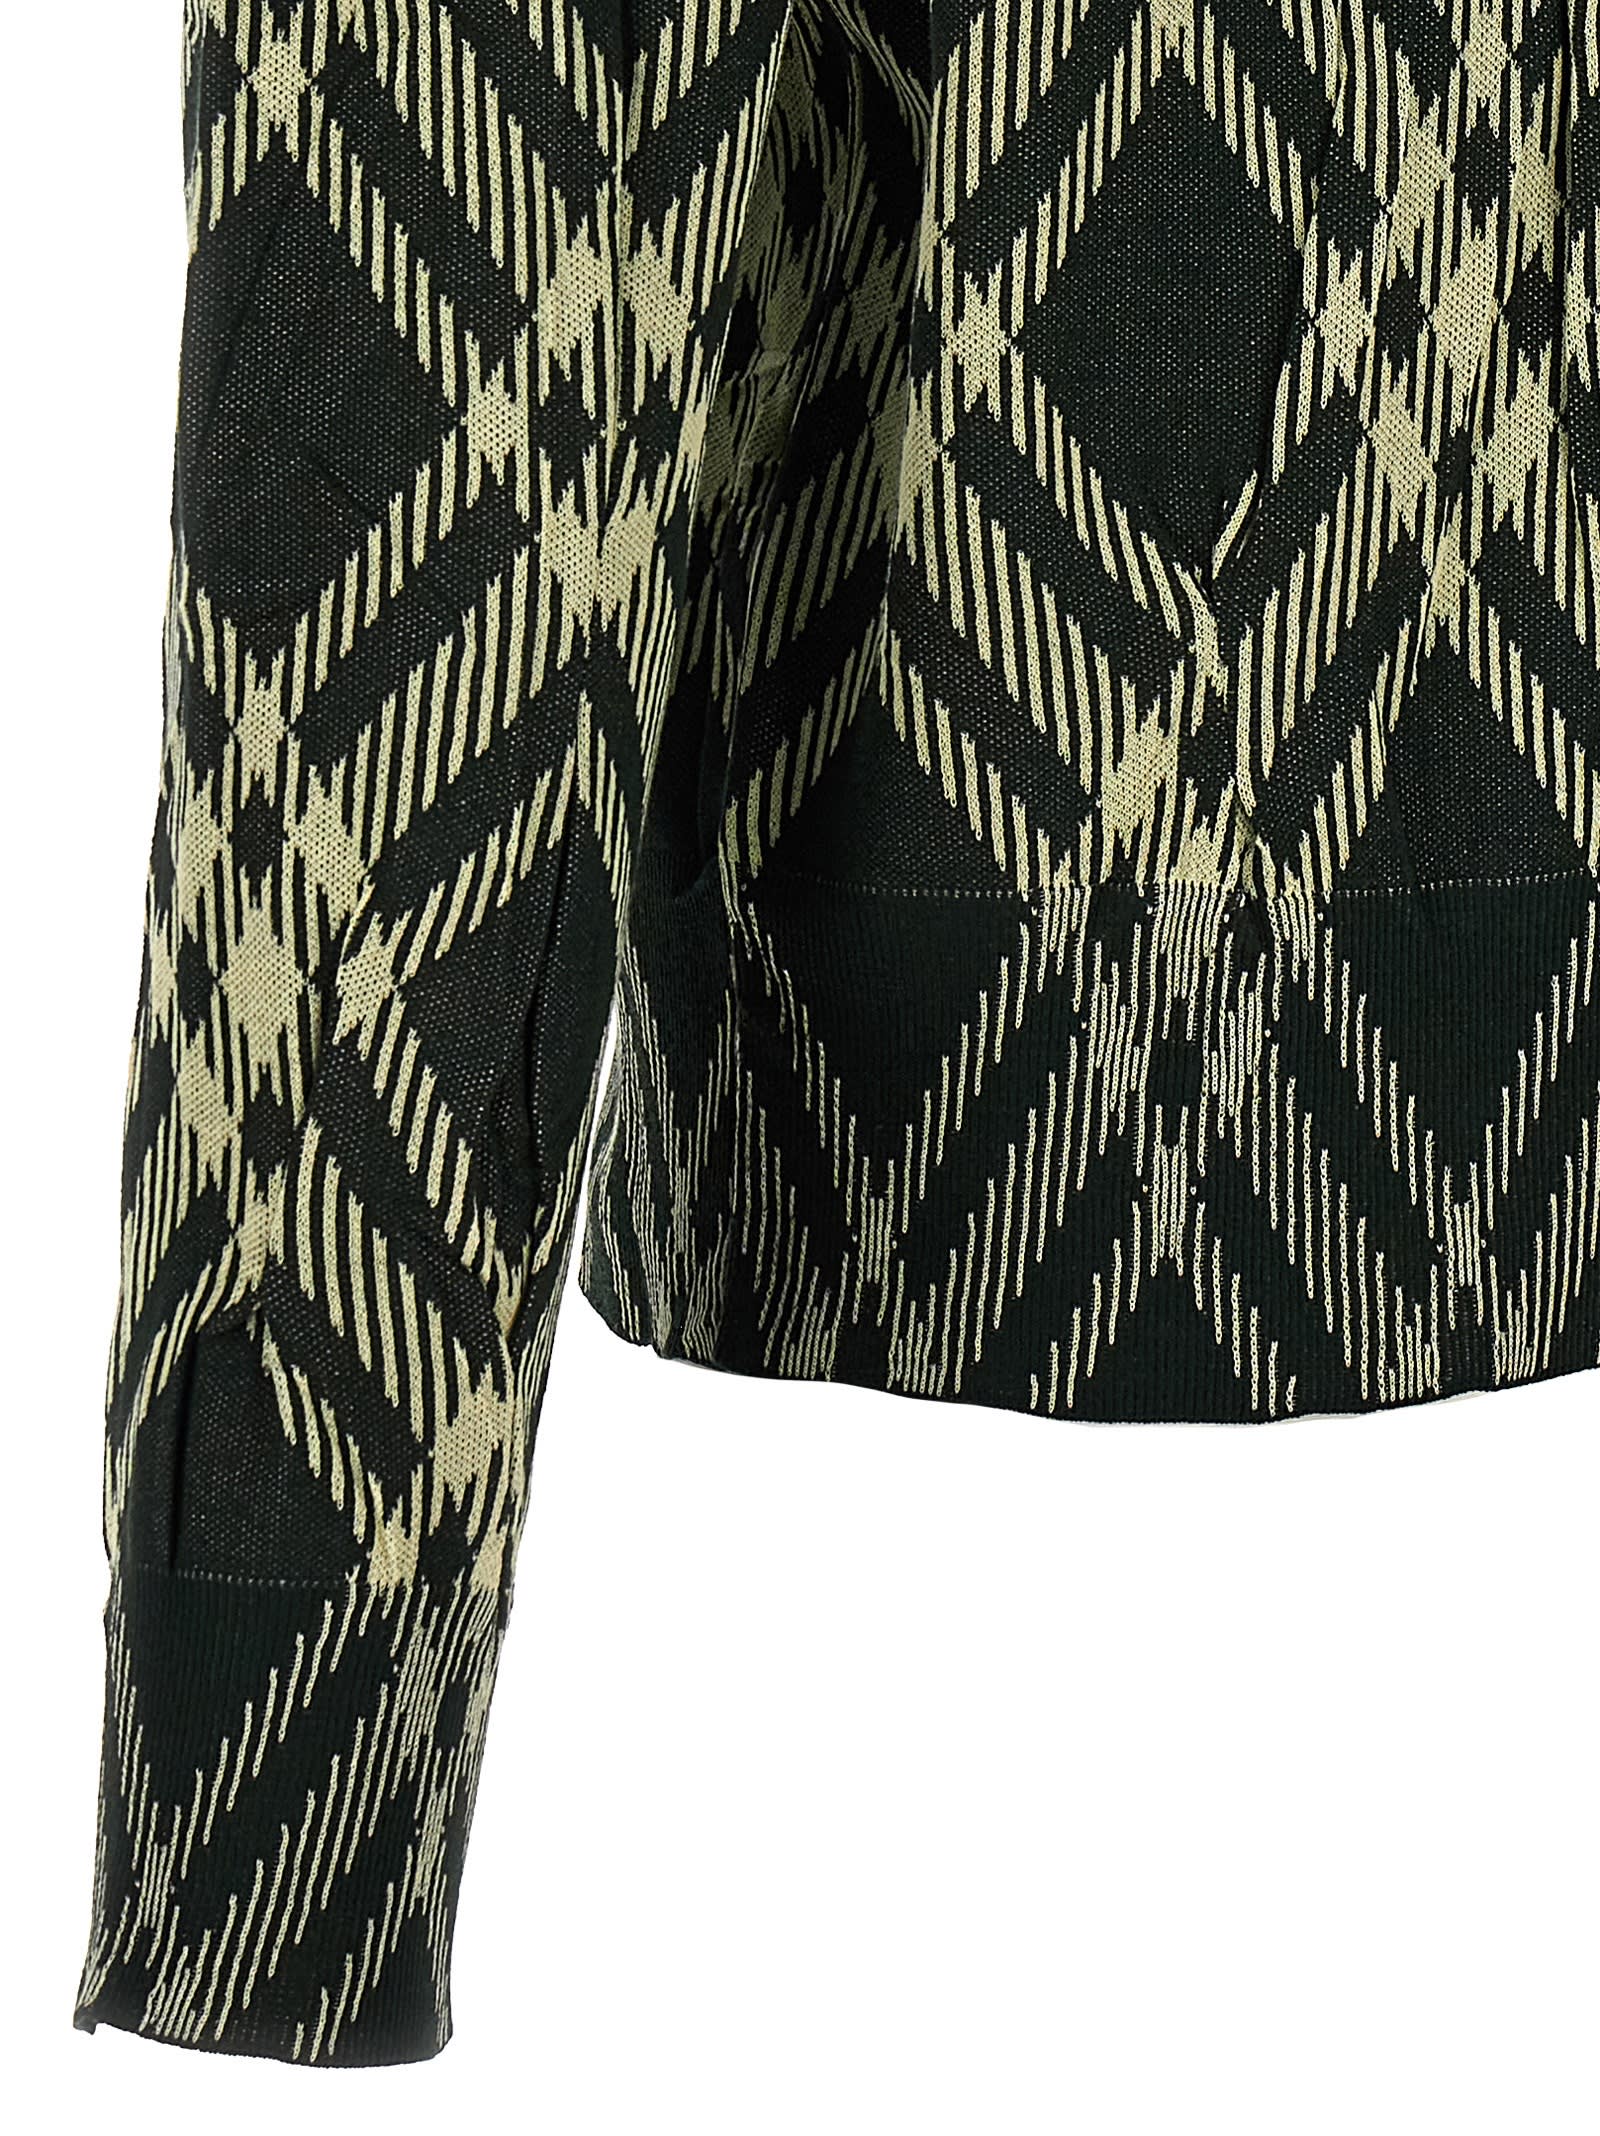 Shop Burberry Check Crinkled Sweater In Green